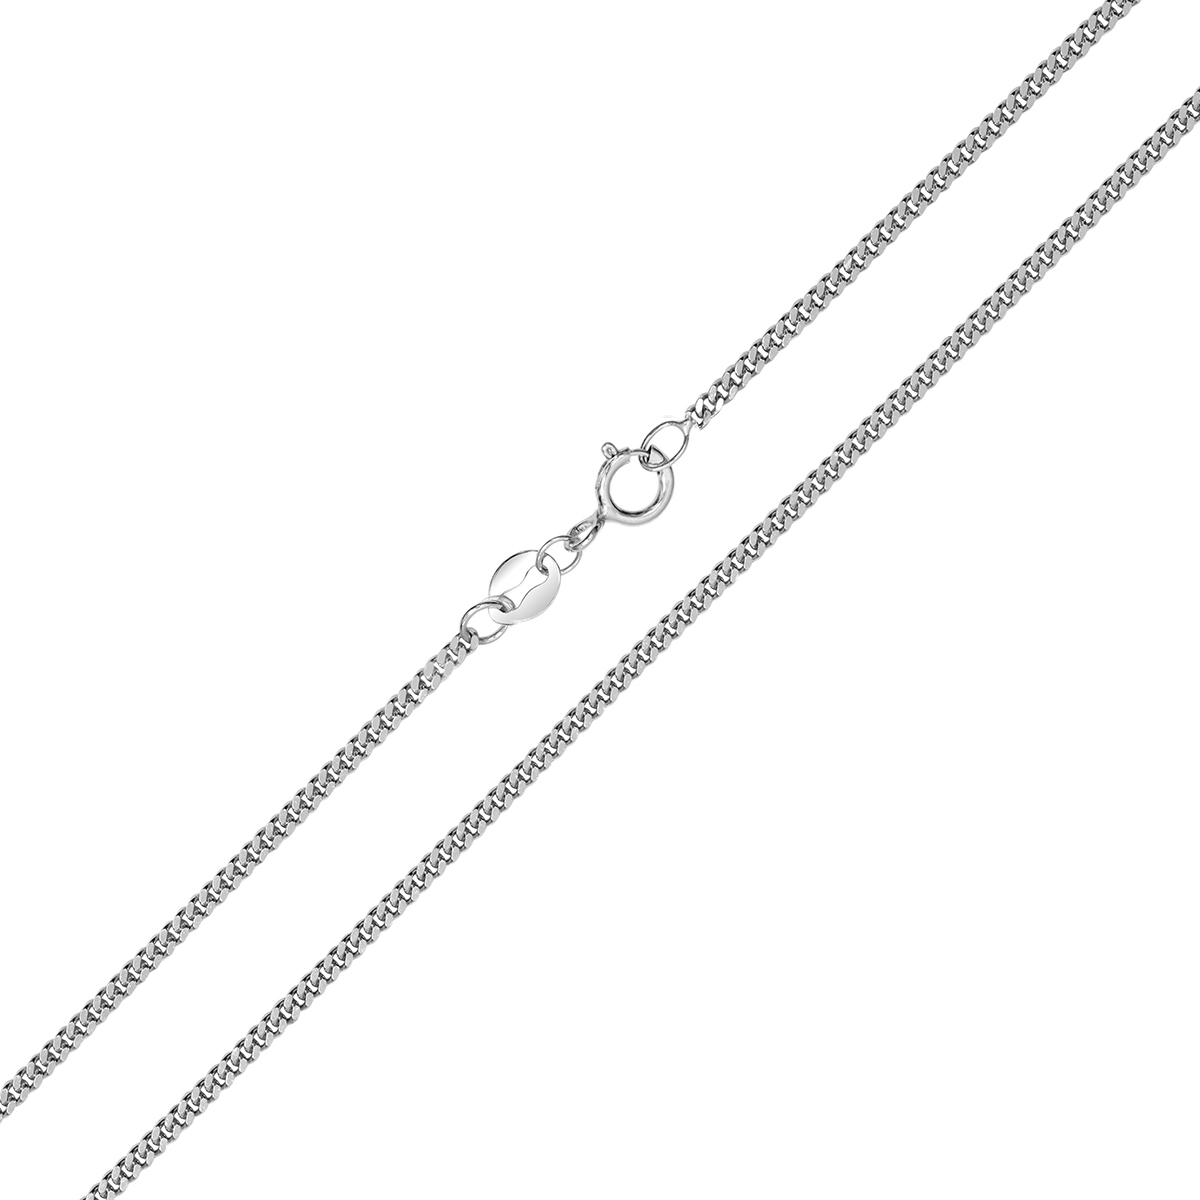 10K White Gold 1.5mm Diamond Cut Gormette Chain with Spring Ring Clasp - 20 Inch